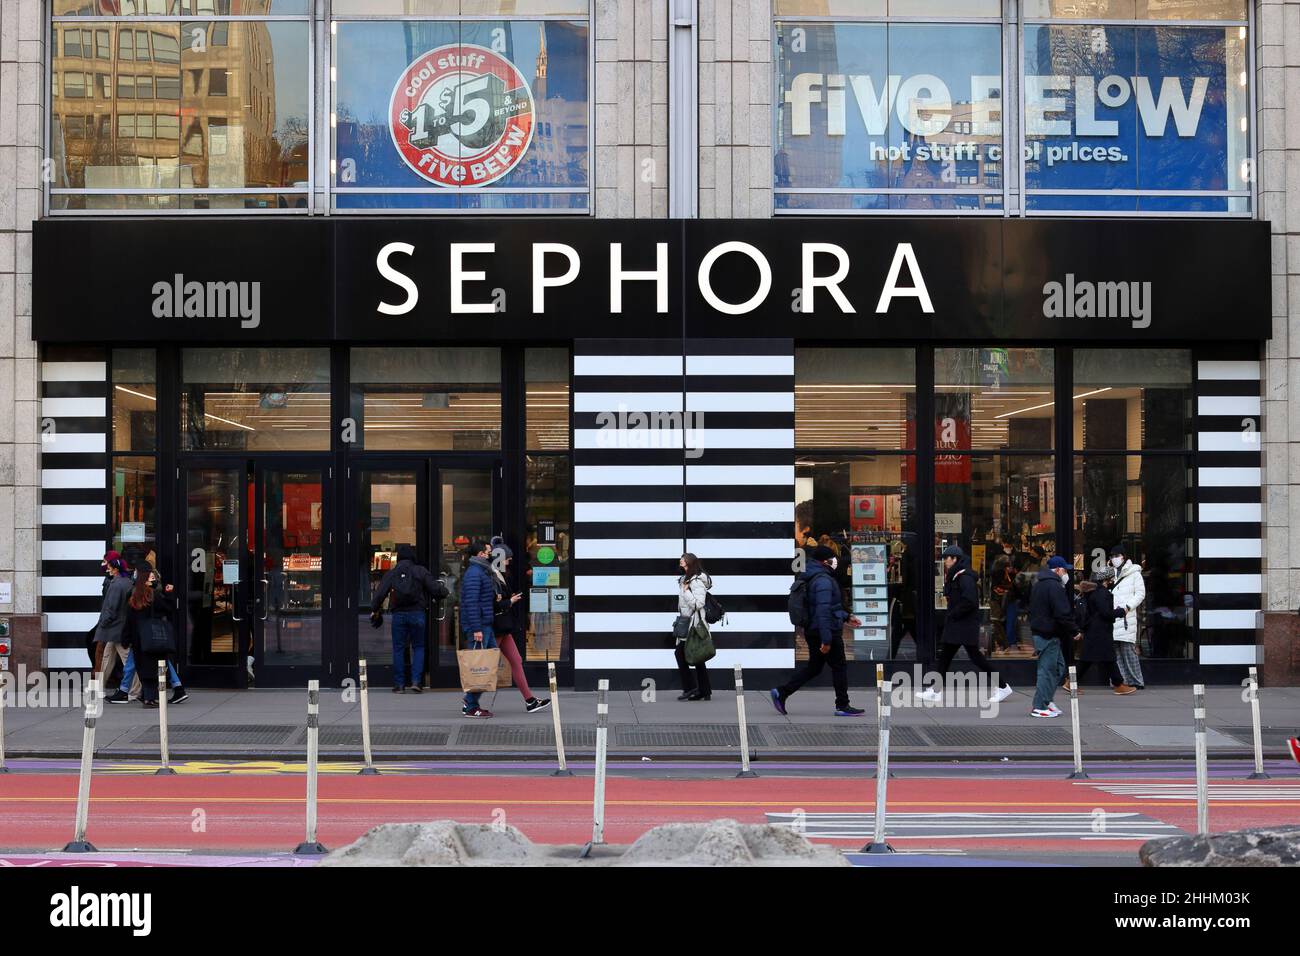 Sephora, Five Below, 4 Union Square, 40 E 14th St, New York, NYC storefront photo of a cosmetics store, and retailing in Union Square, Manhattan. Stock Photo